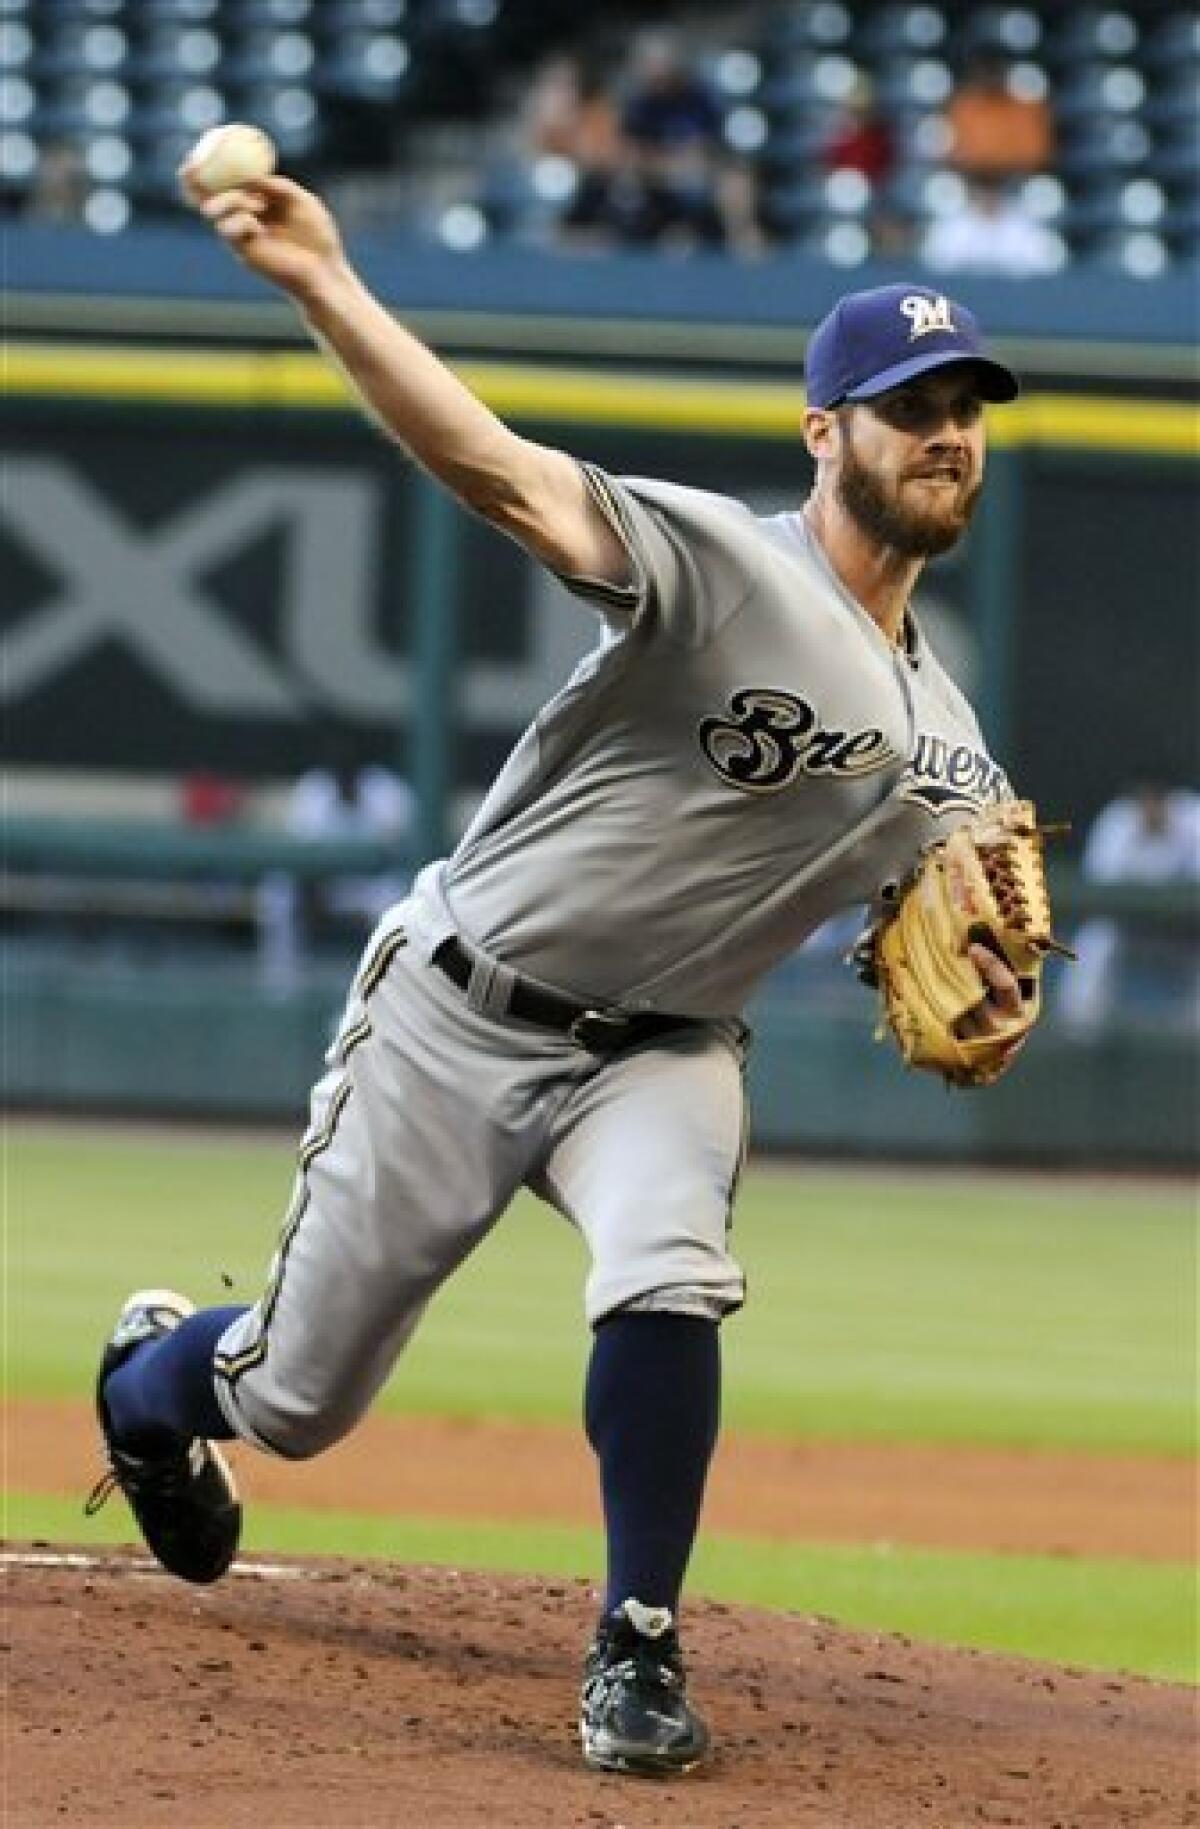 Bush, Hoffman pitch Brewers to 7th straight win - The San Diego